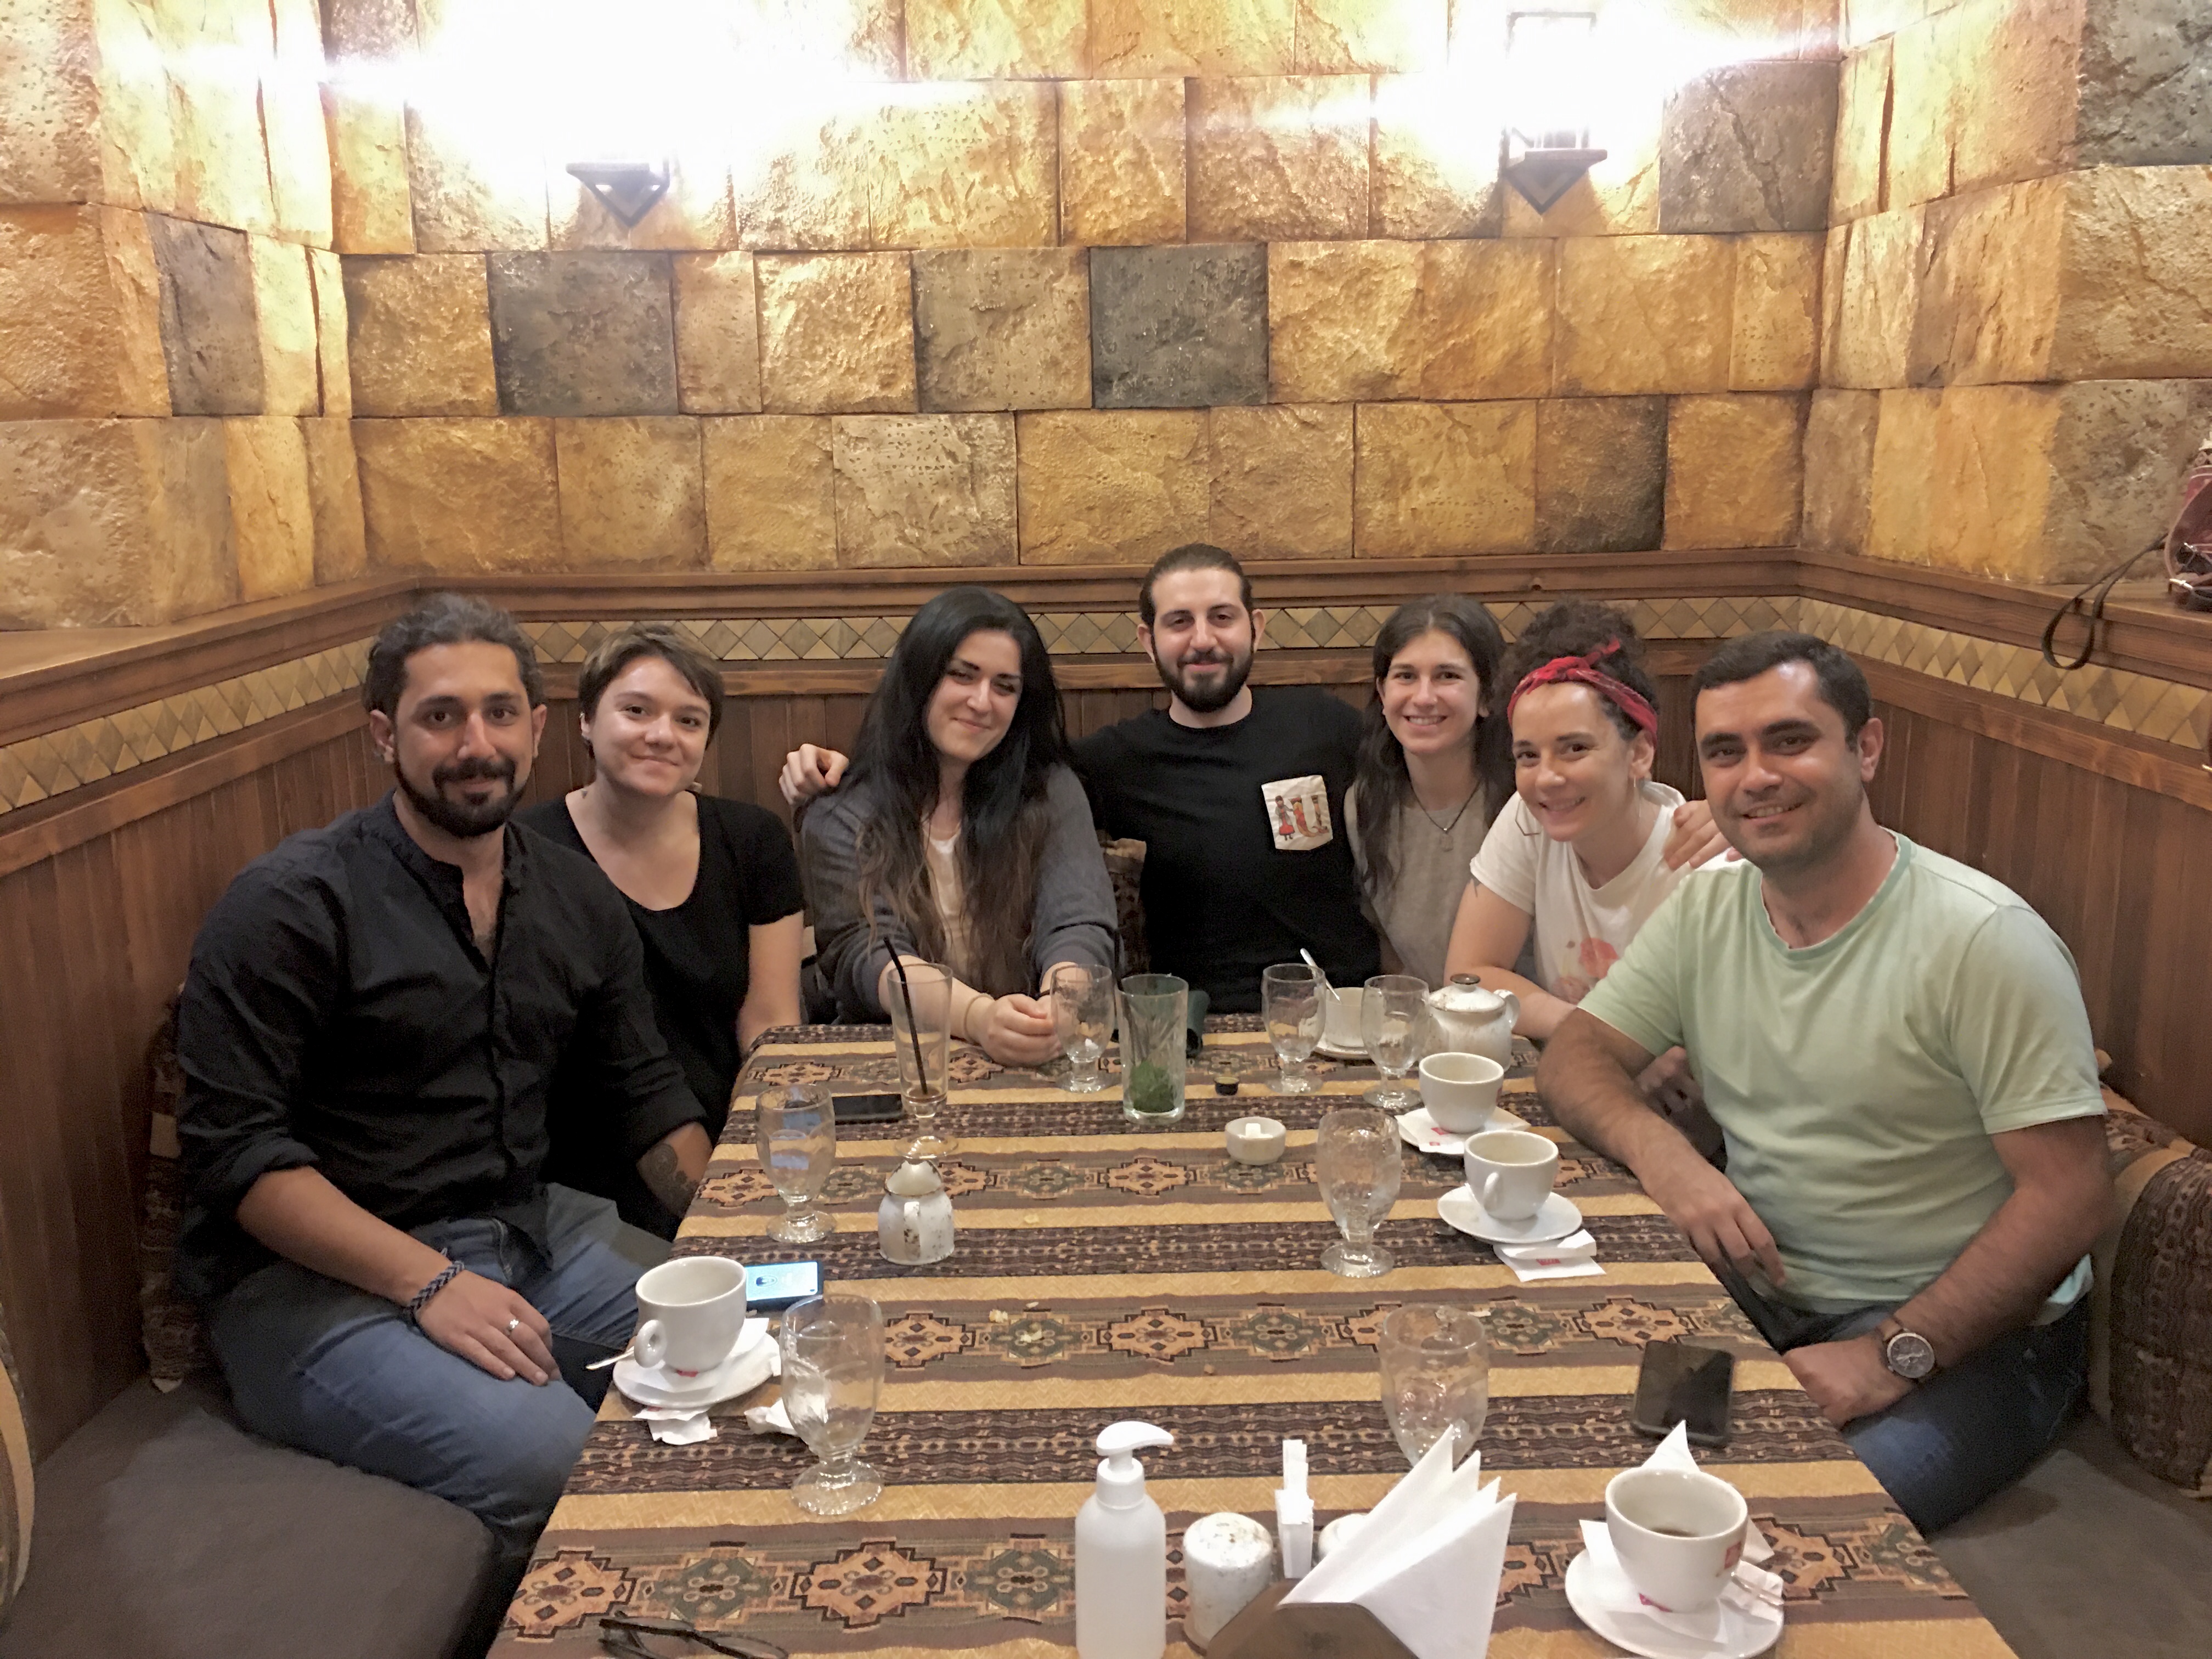 A group photo with our friends and collaborators at Tavern Yerevan.